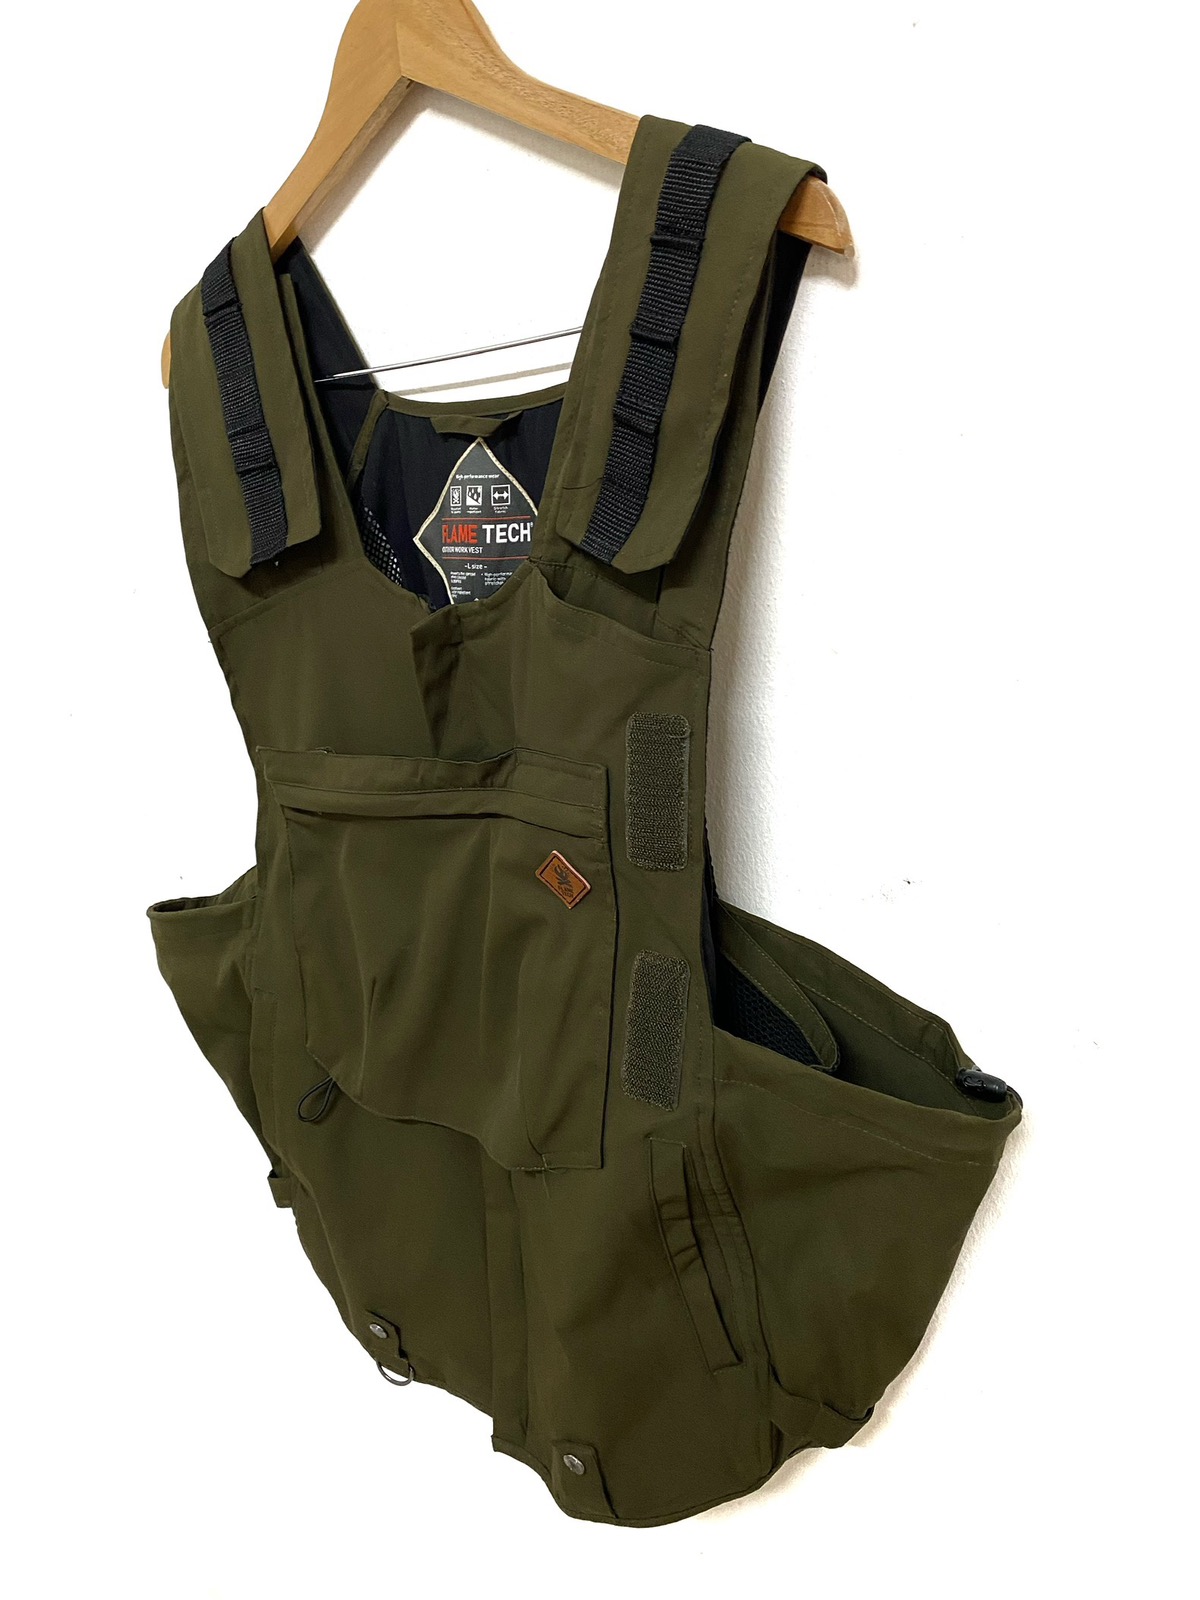 Other Designers Outdoor Life - Fieldcore Flame Tech Multipocket